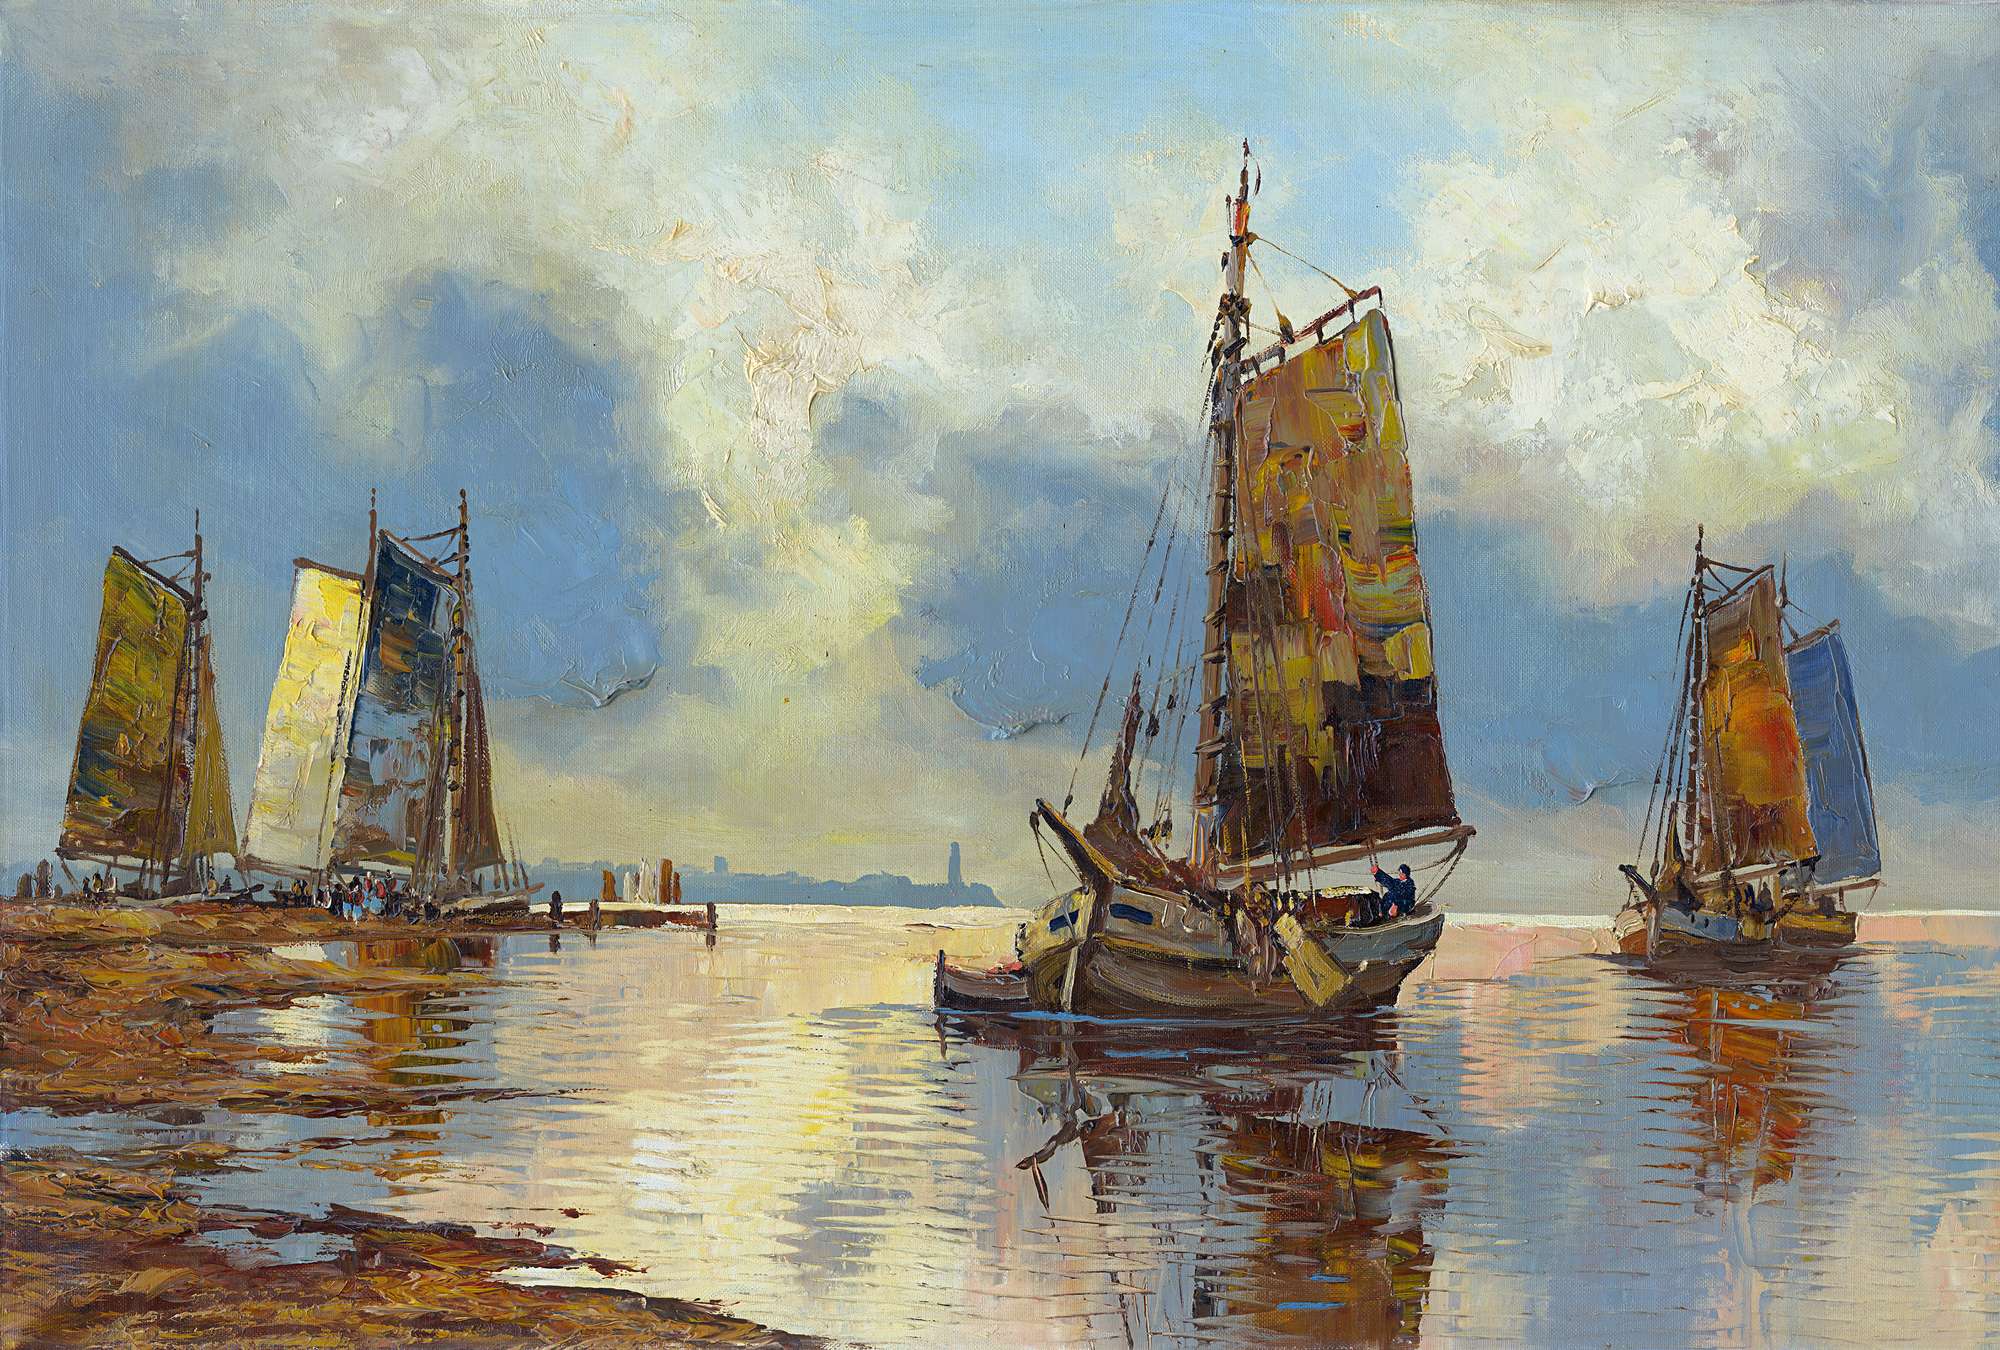             Photo wallpaper oil painting with historical sailing ships
        